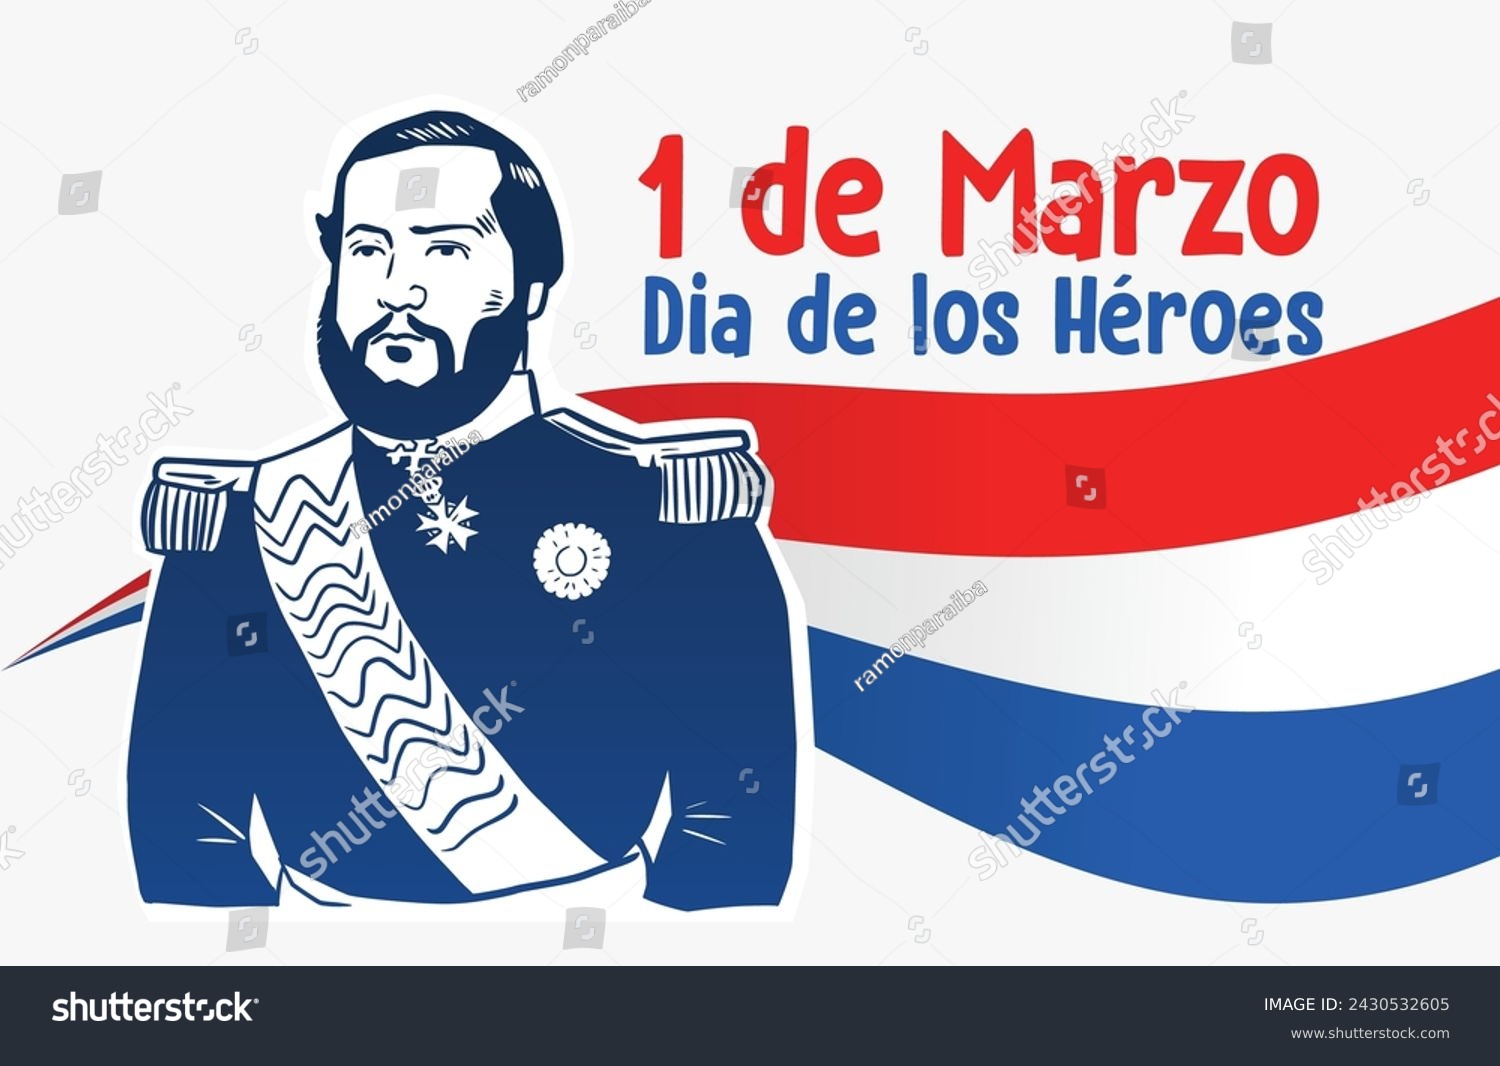 Editable banner alluding to Heroes' Day. March 1, Solano Lopez. #2430532605